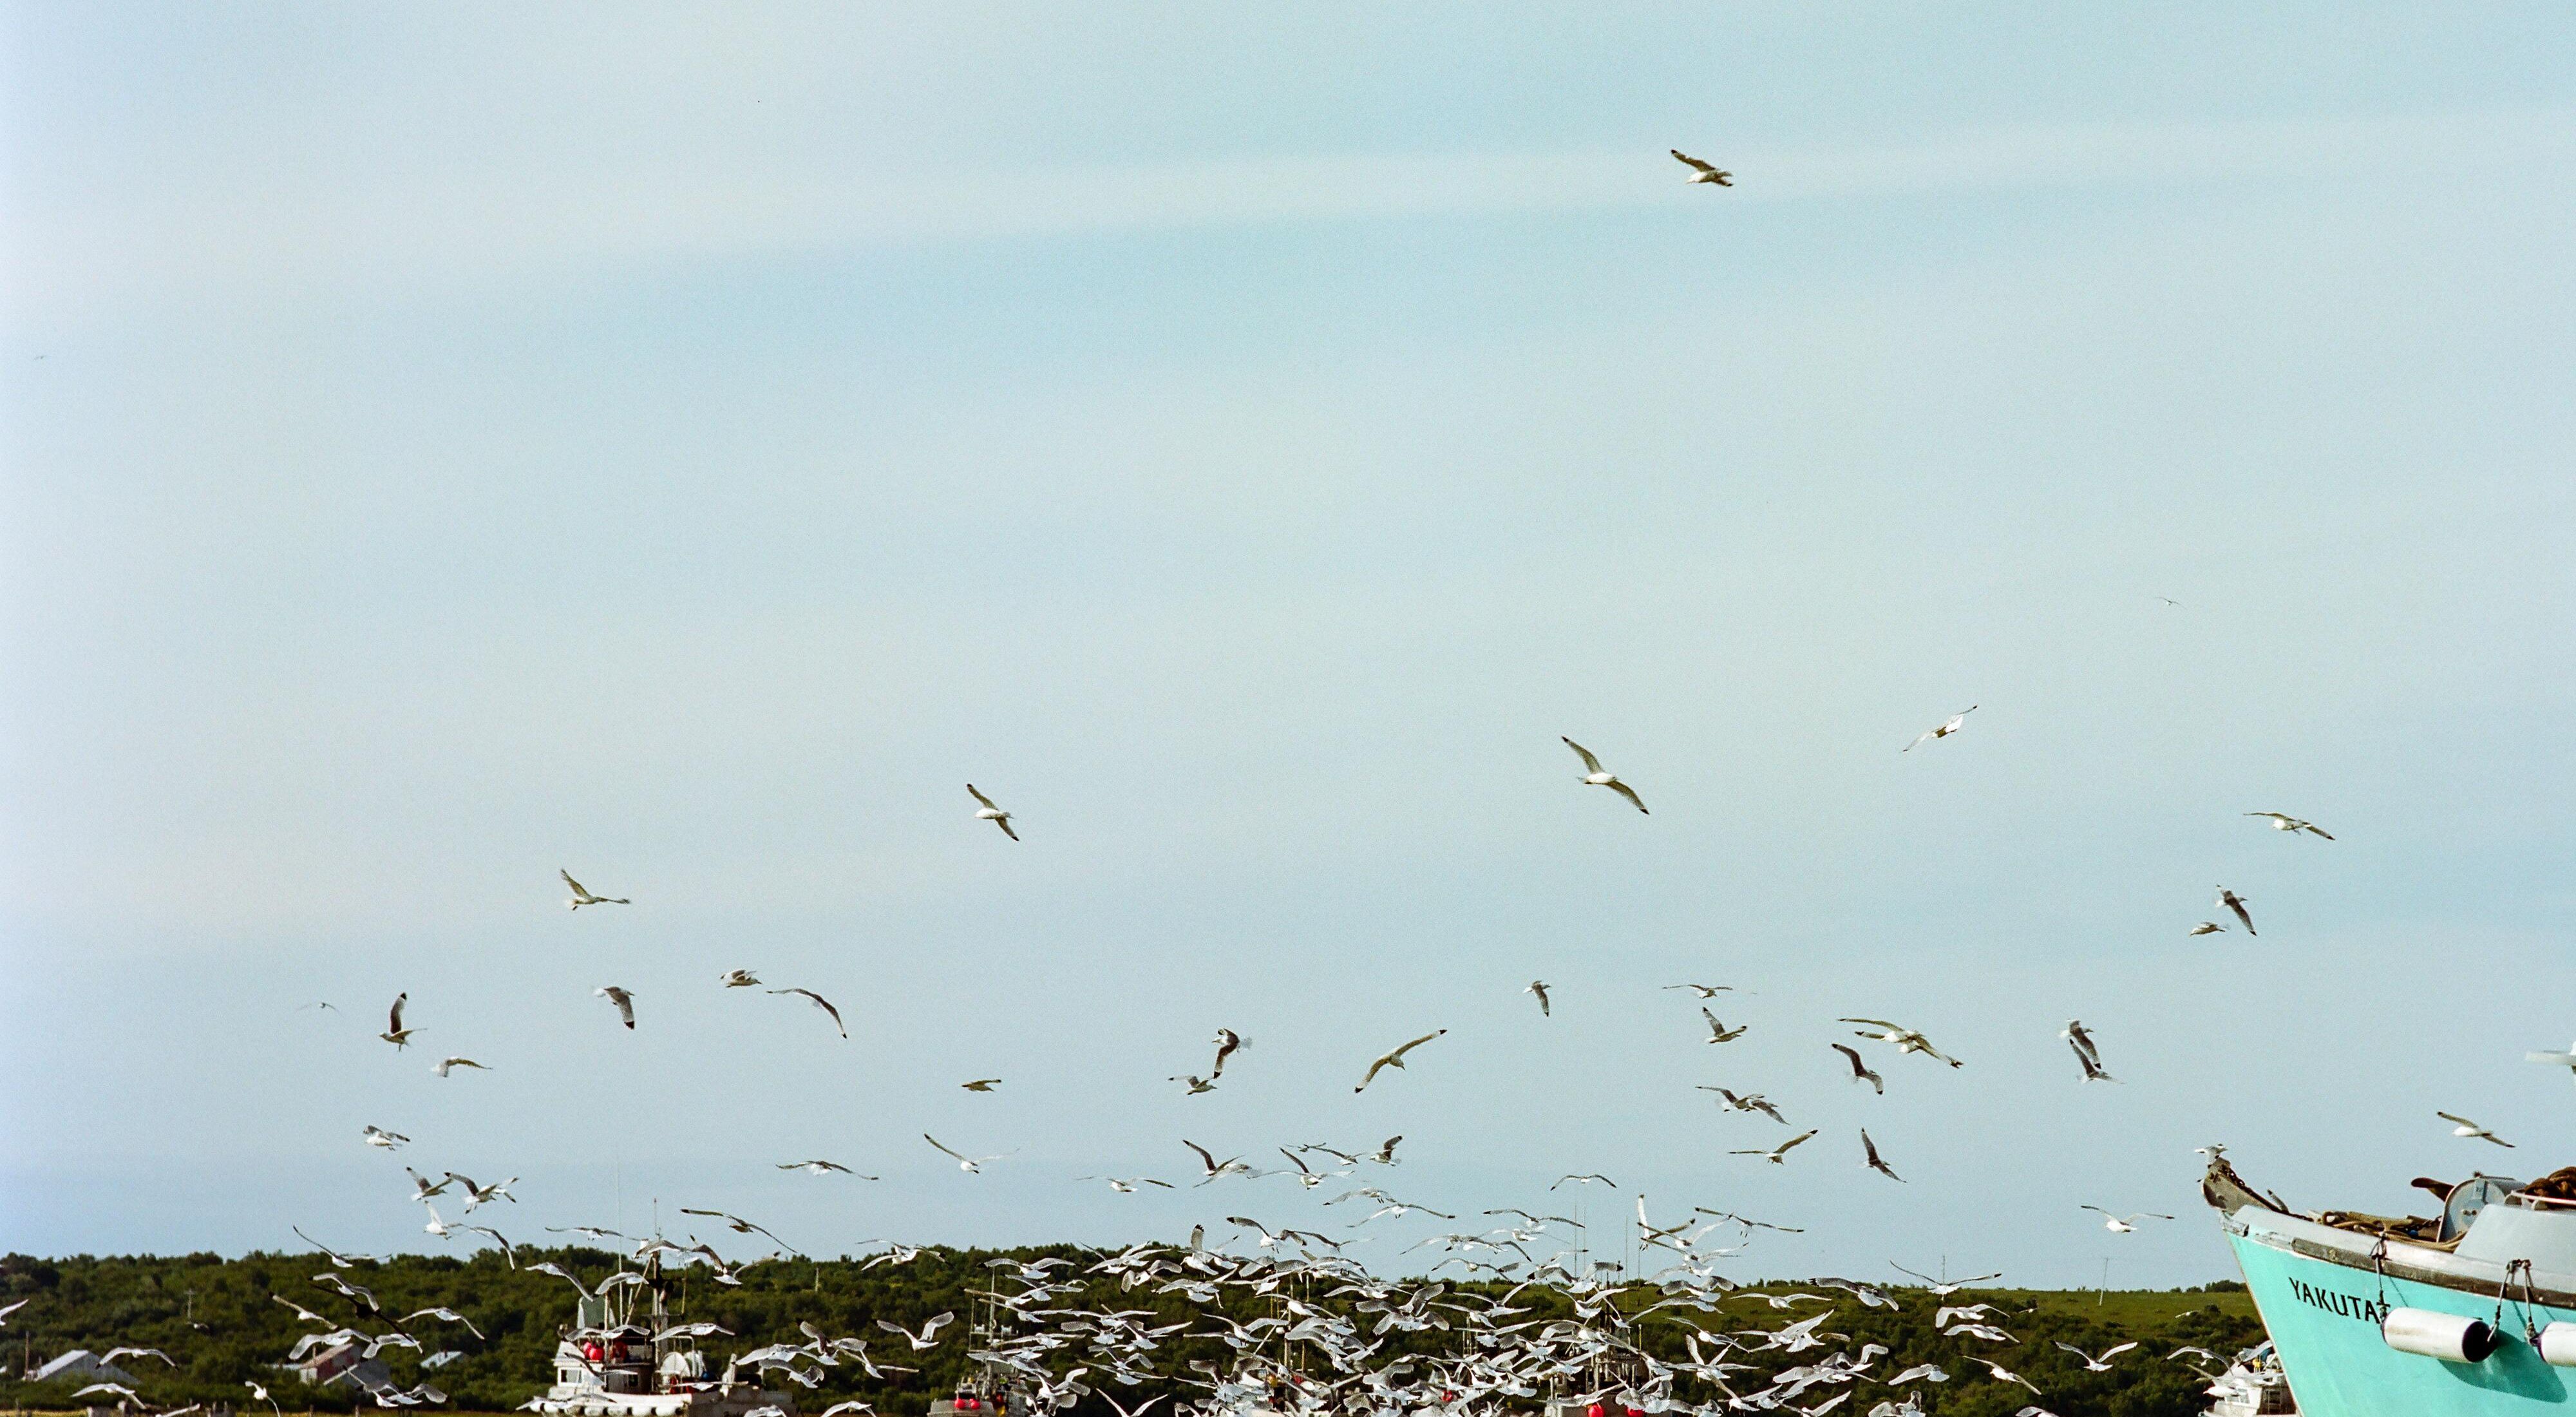 Several salmon fishing boats surrounded by gulls.